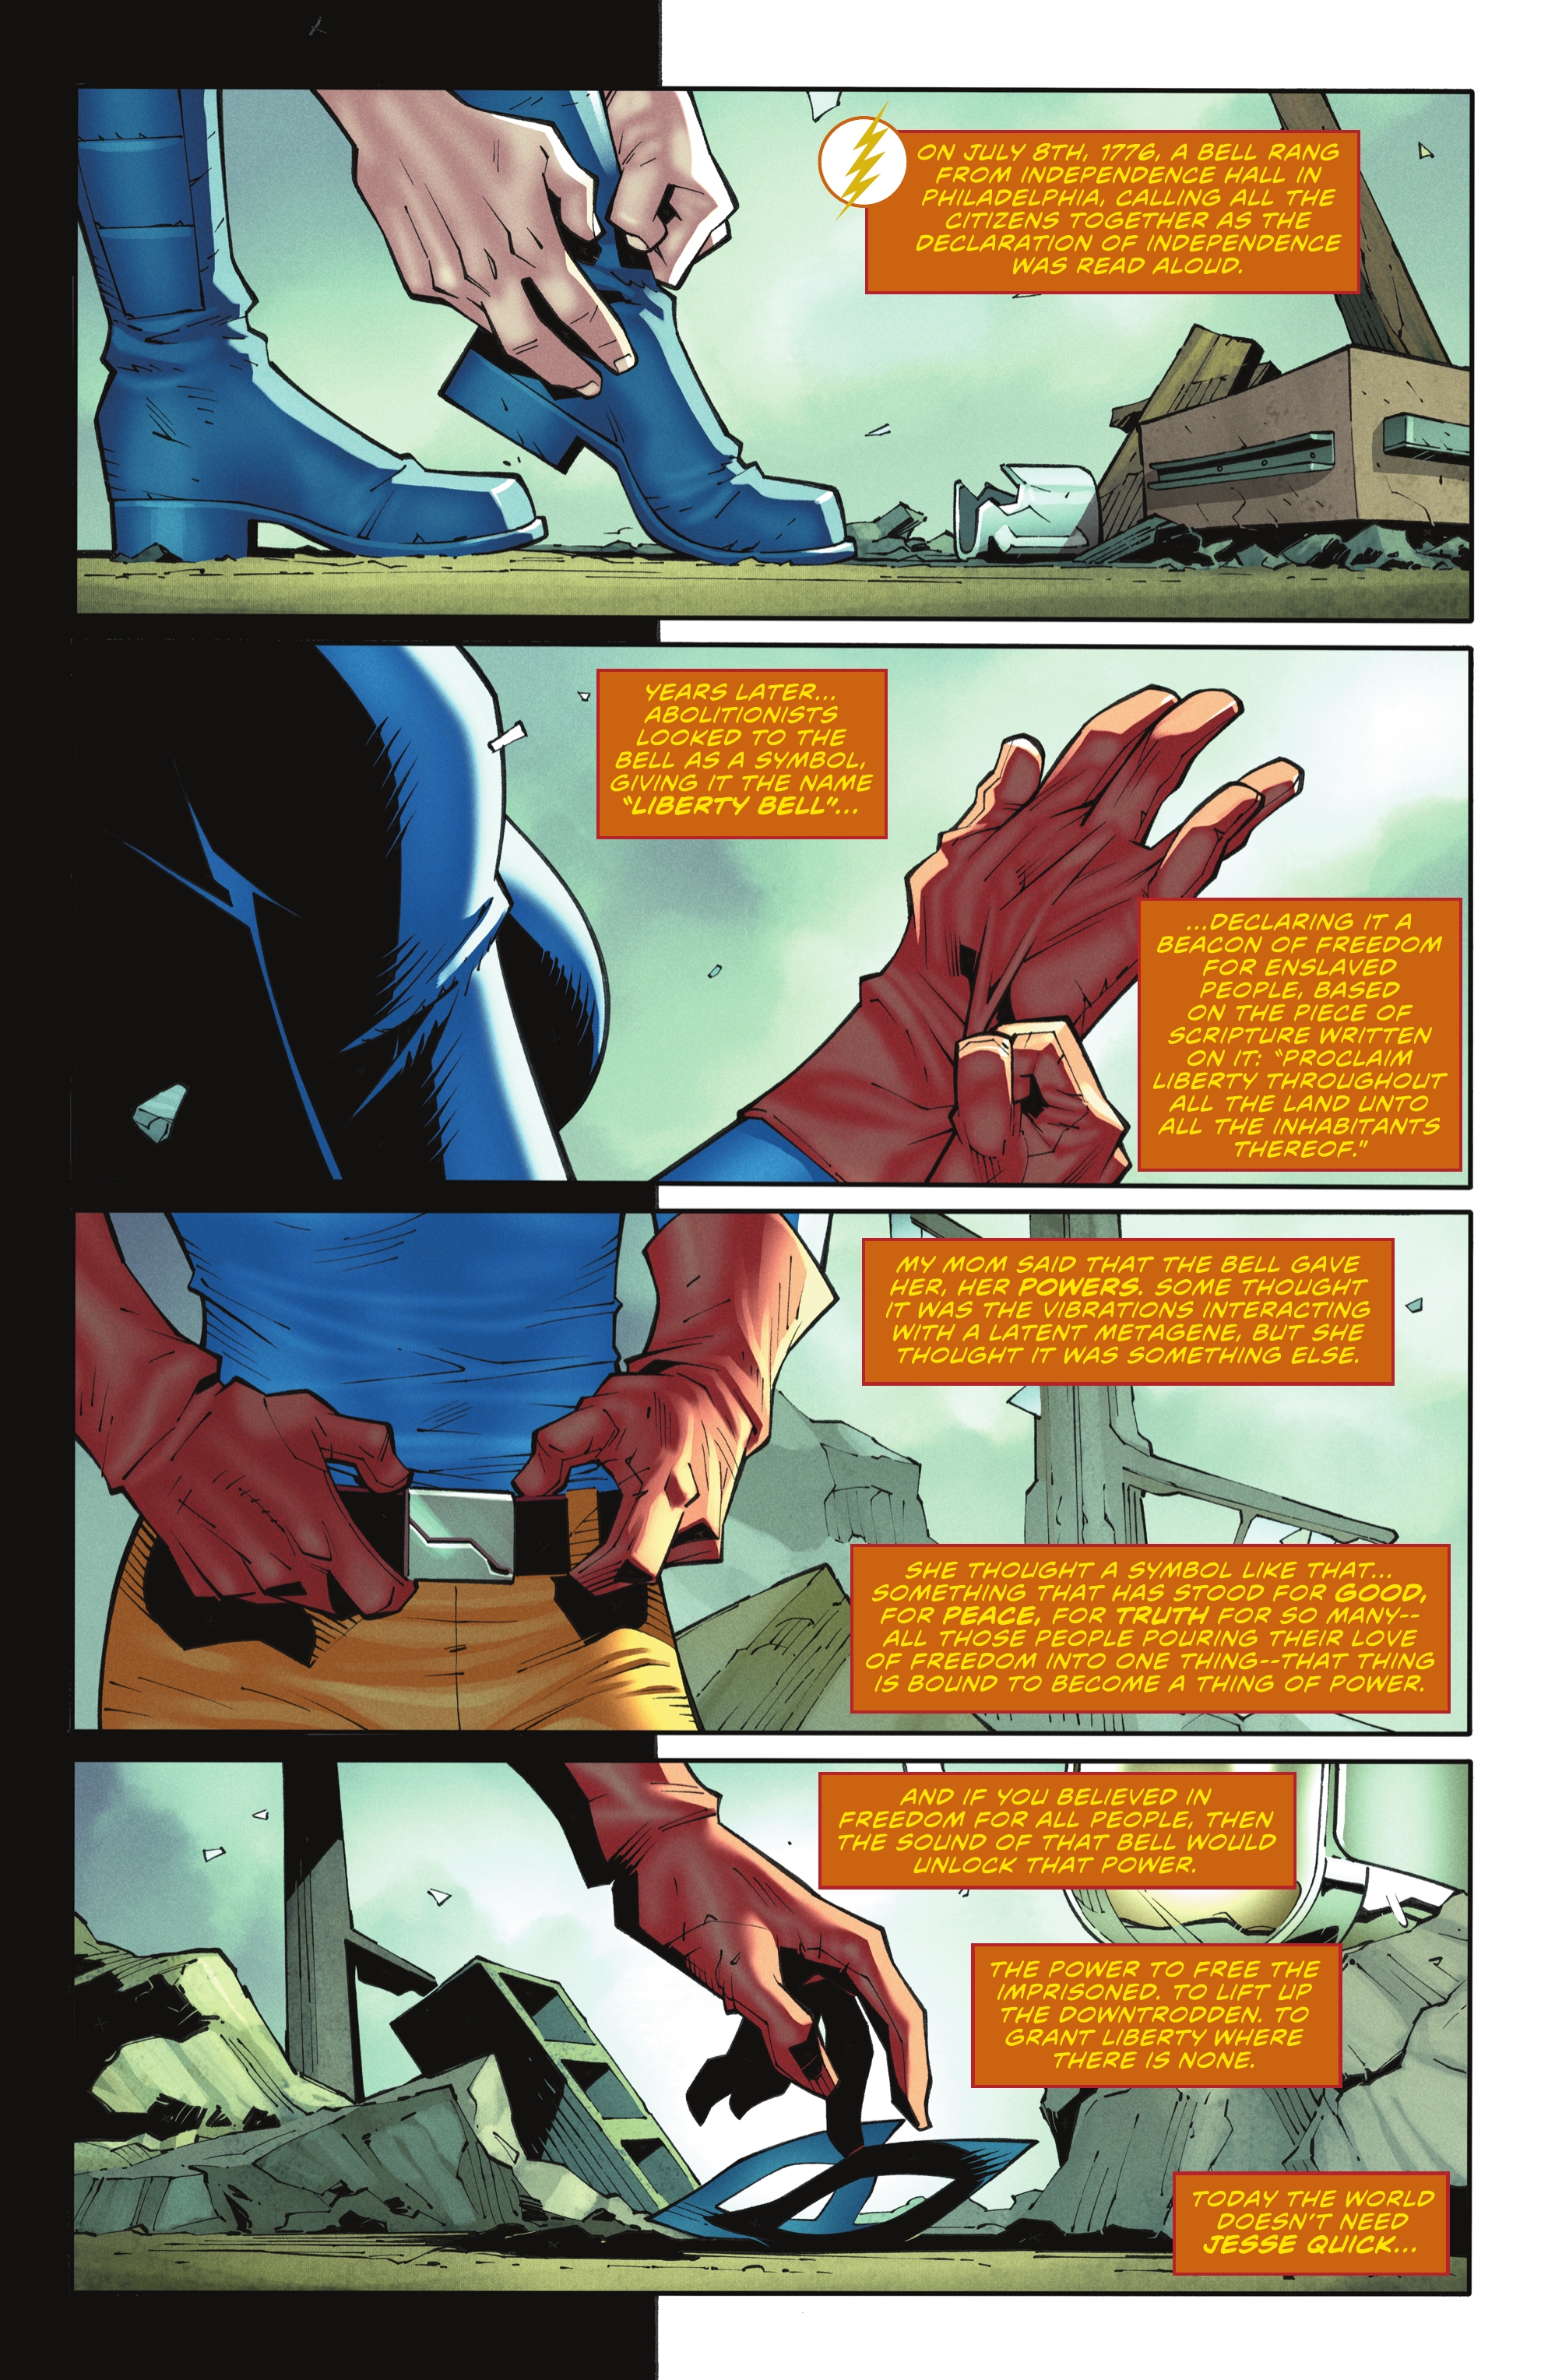 The Flash (2016-): Chapter 795 - Page 3